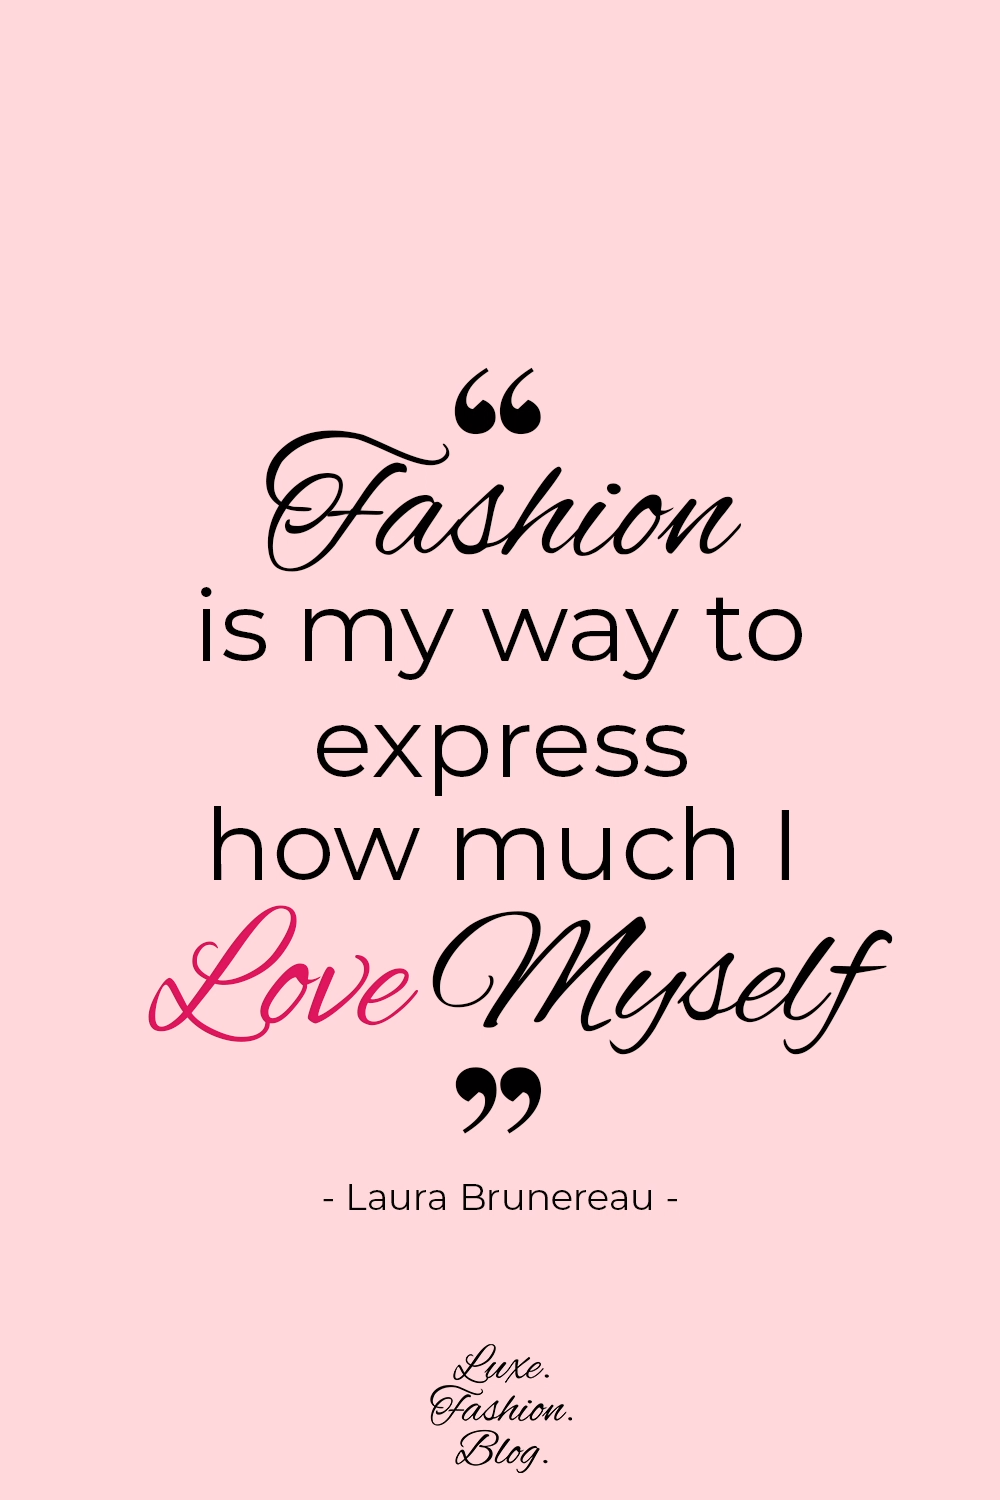 Love for Fashion Quotes - St. Valentine's Day | Quotes Self Love | LuxeFashionBlog.com - Love for Fashion Quotes - St. Valentine's Day | Quotes Self Love | LuxeFashionBlog.com -   17 beauty Inspiration frases ideas